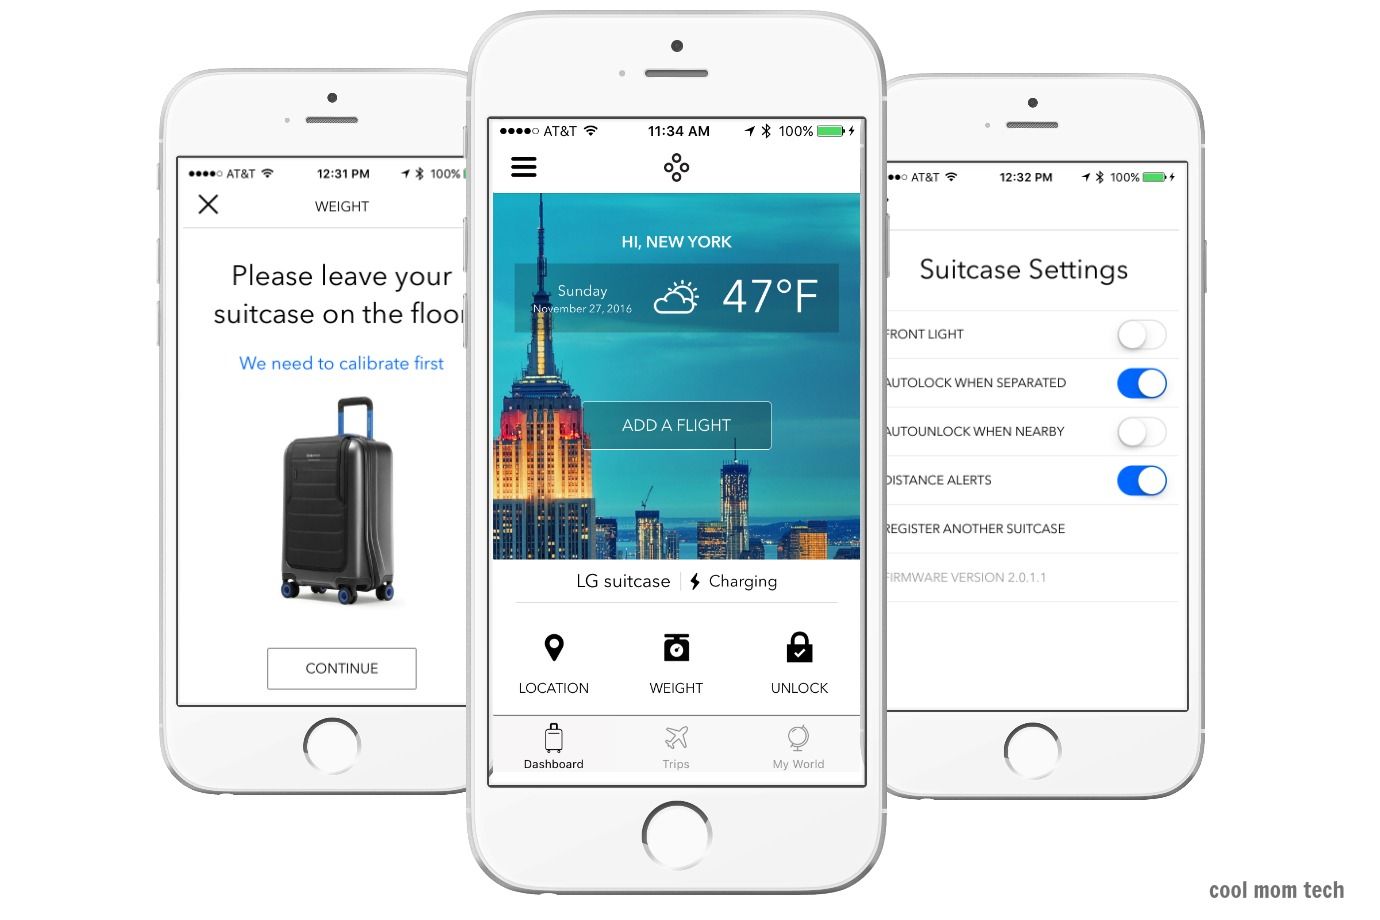 Bluesmart Suitcase controlled, locked, weighed and tracked via companion app